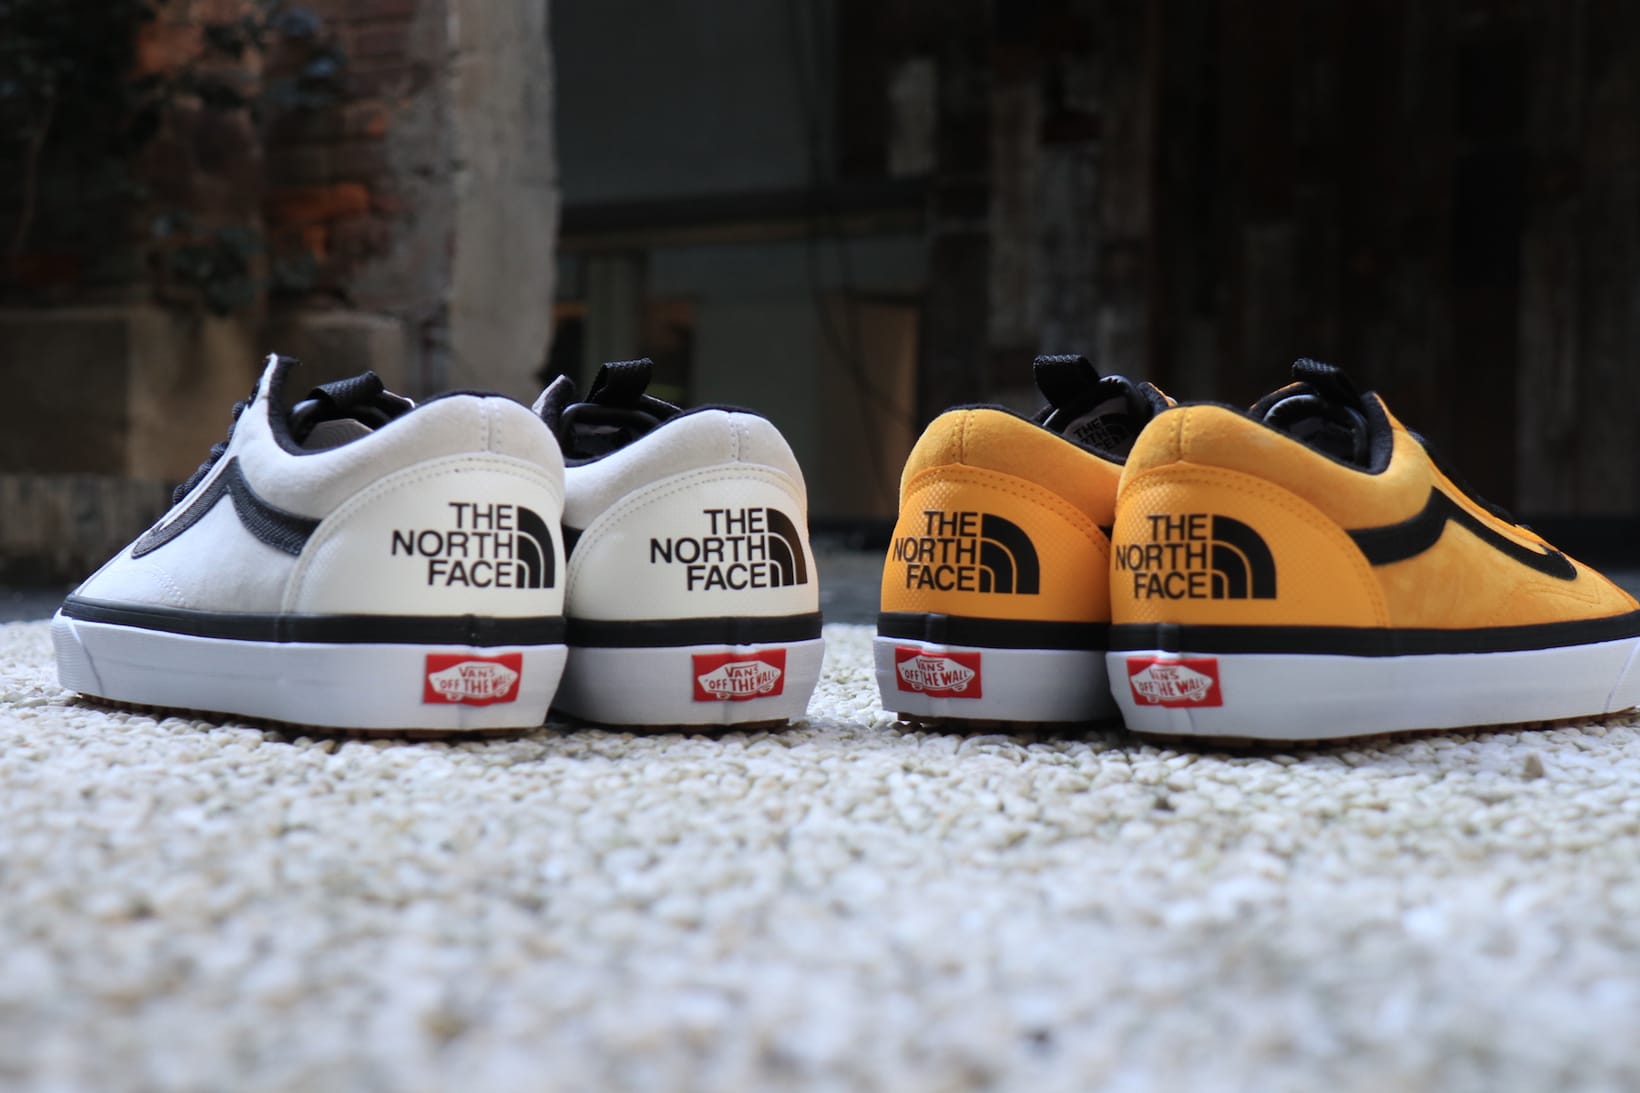 The North Face x Vans 2017 Fall 